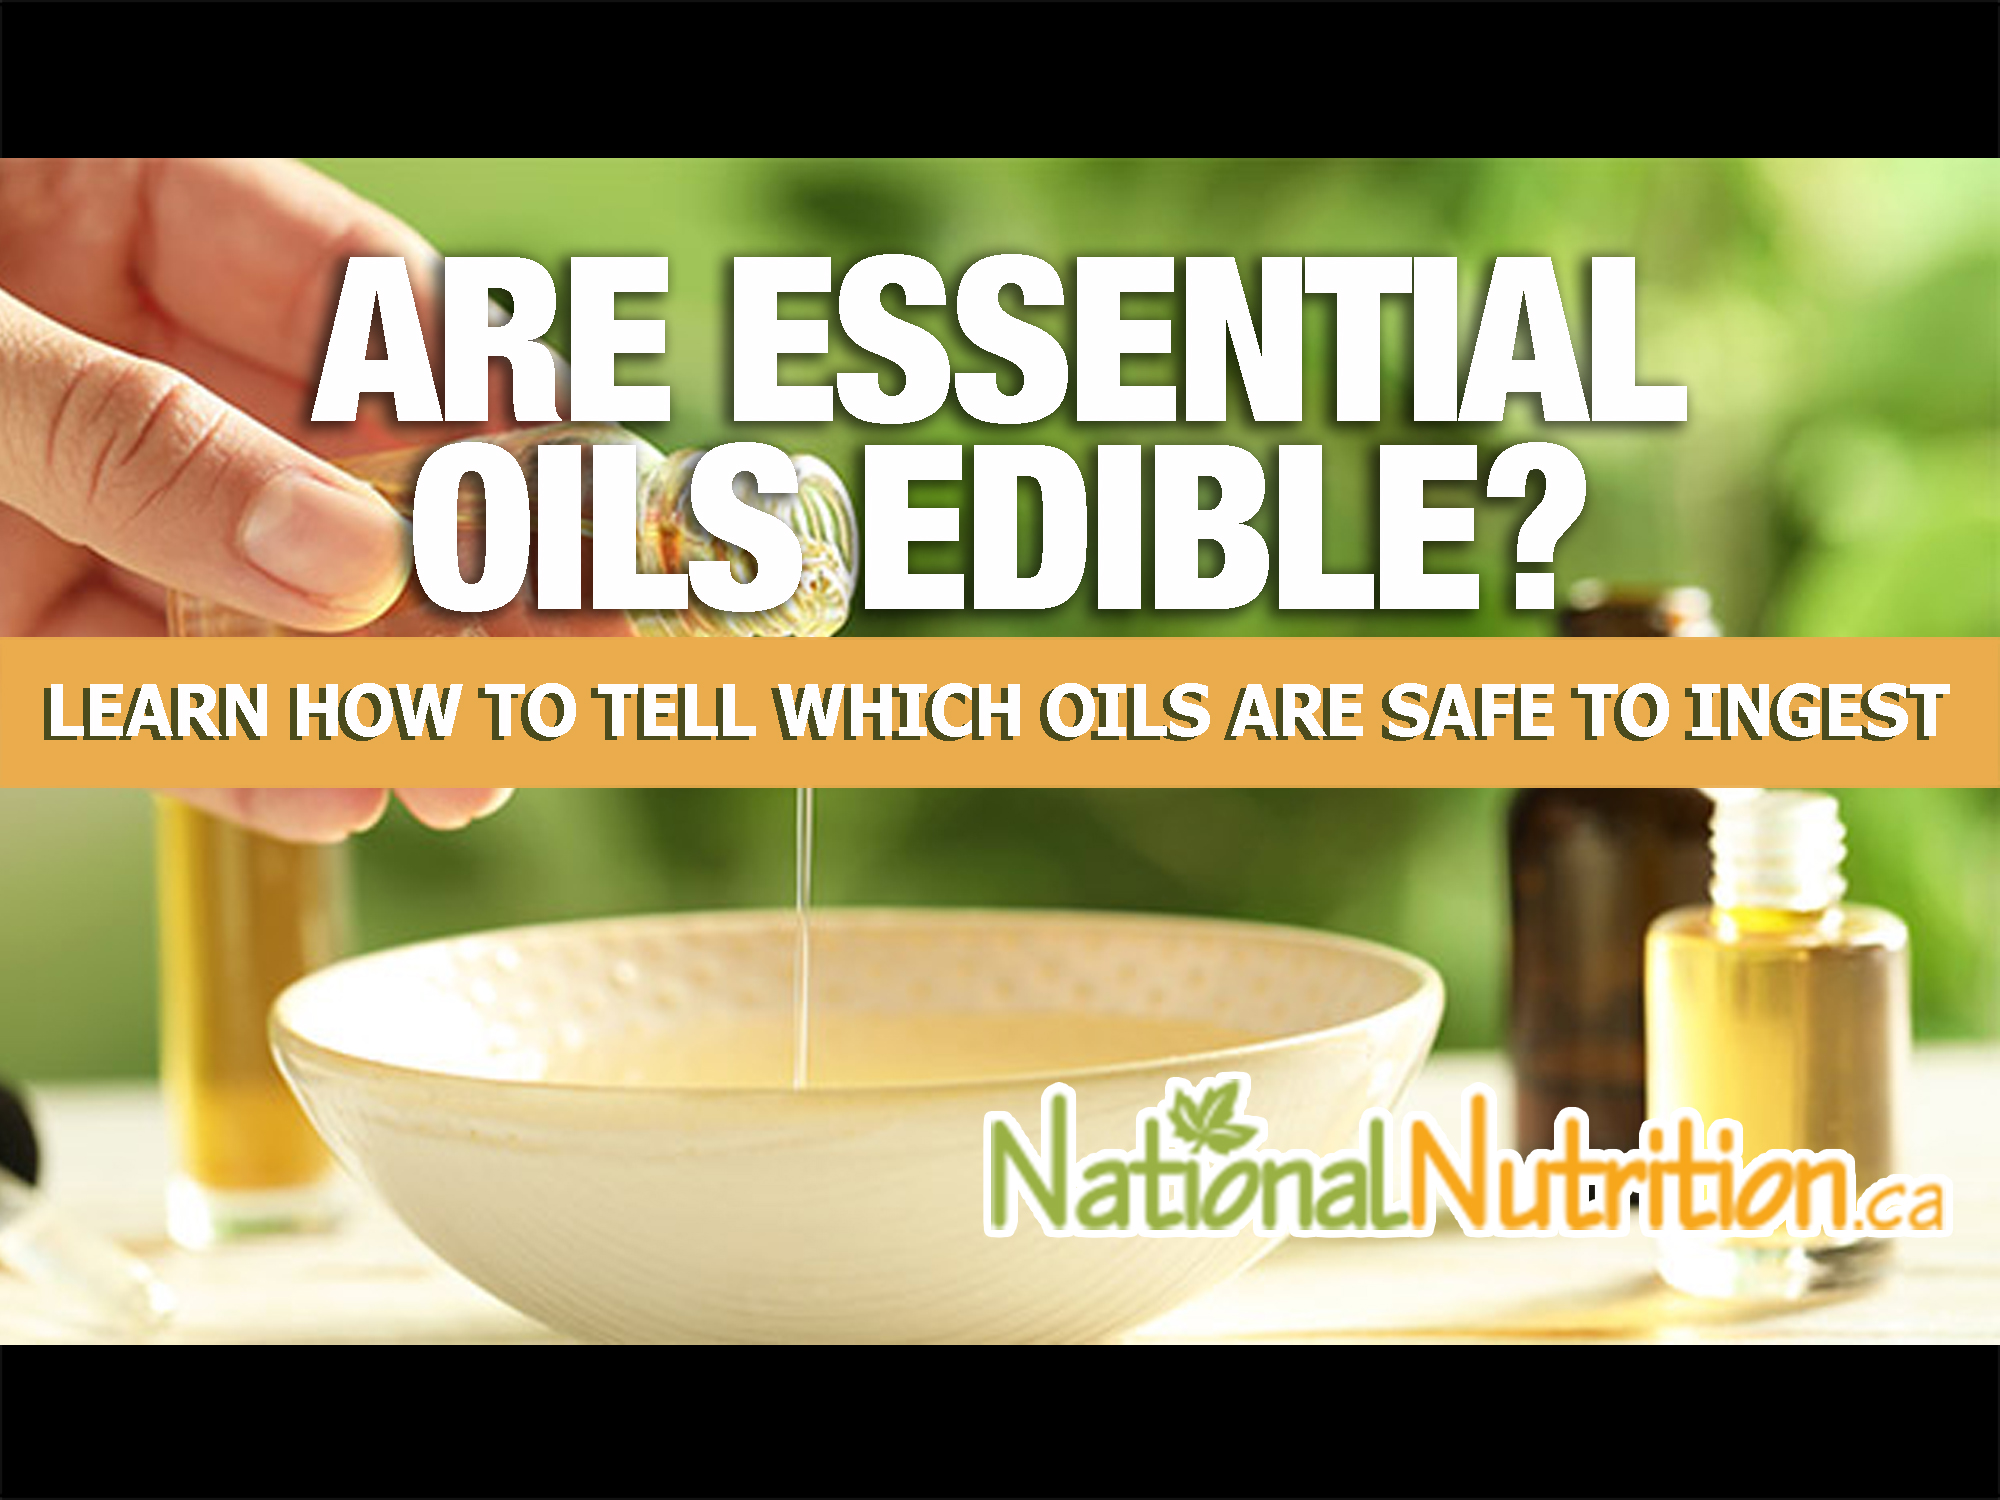 Are Essential Oils Edible? - National Nutrition Articles